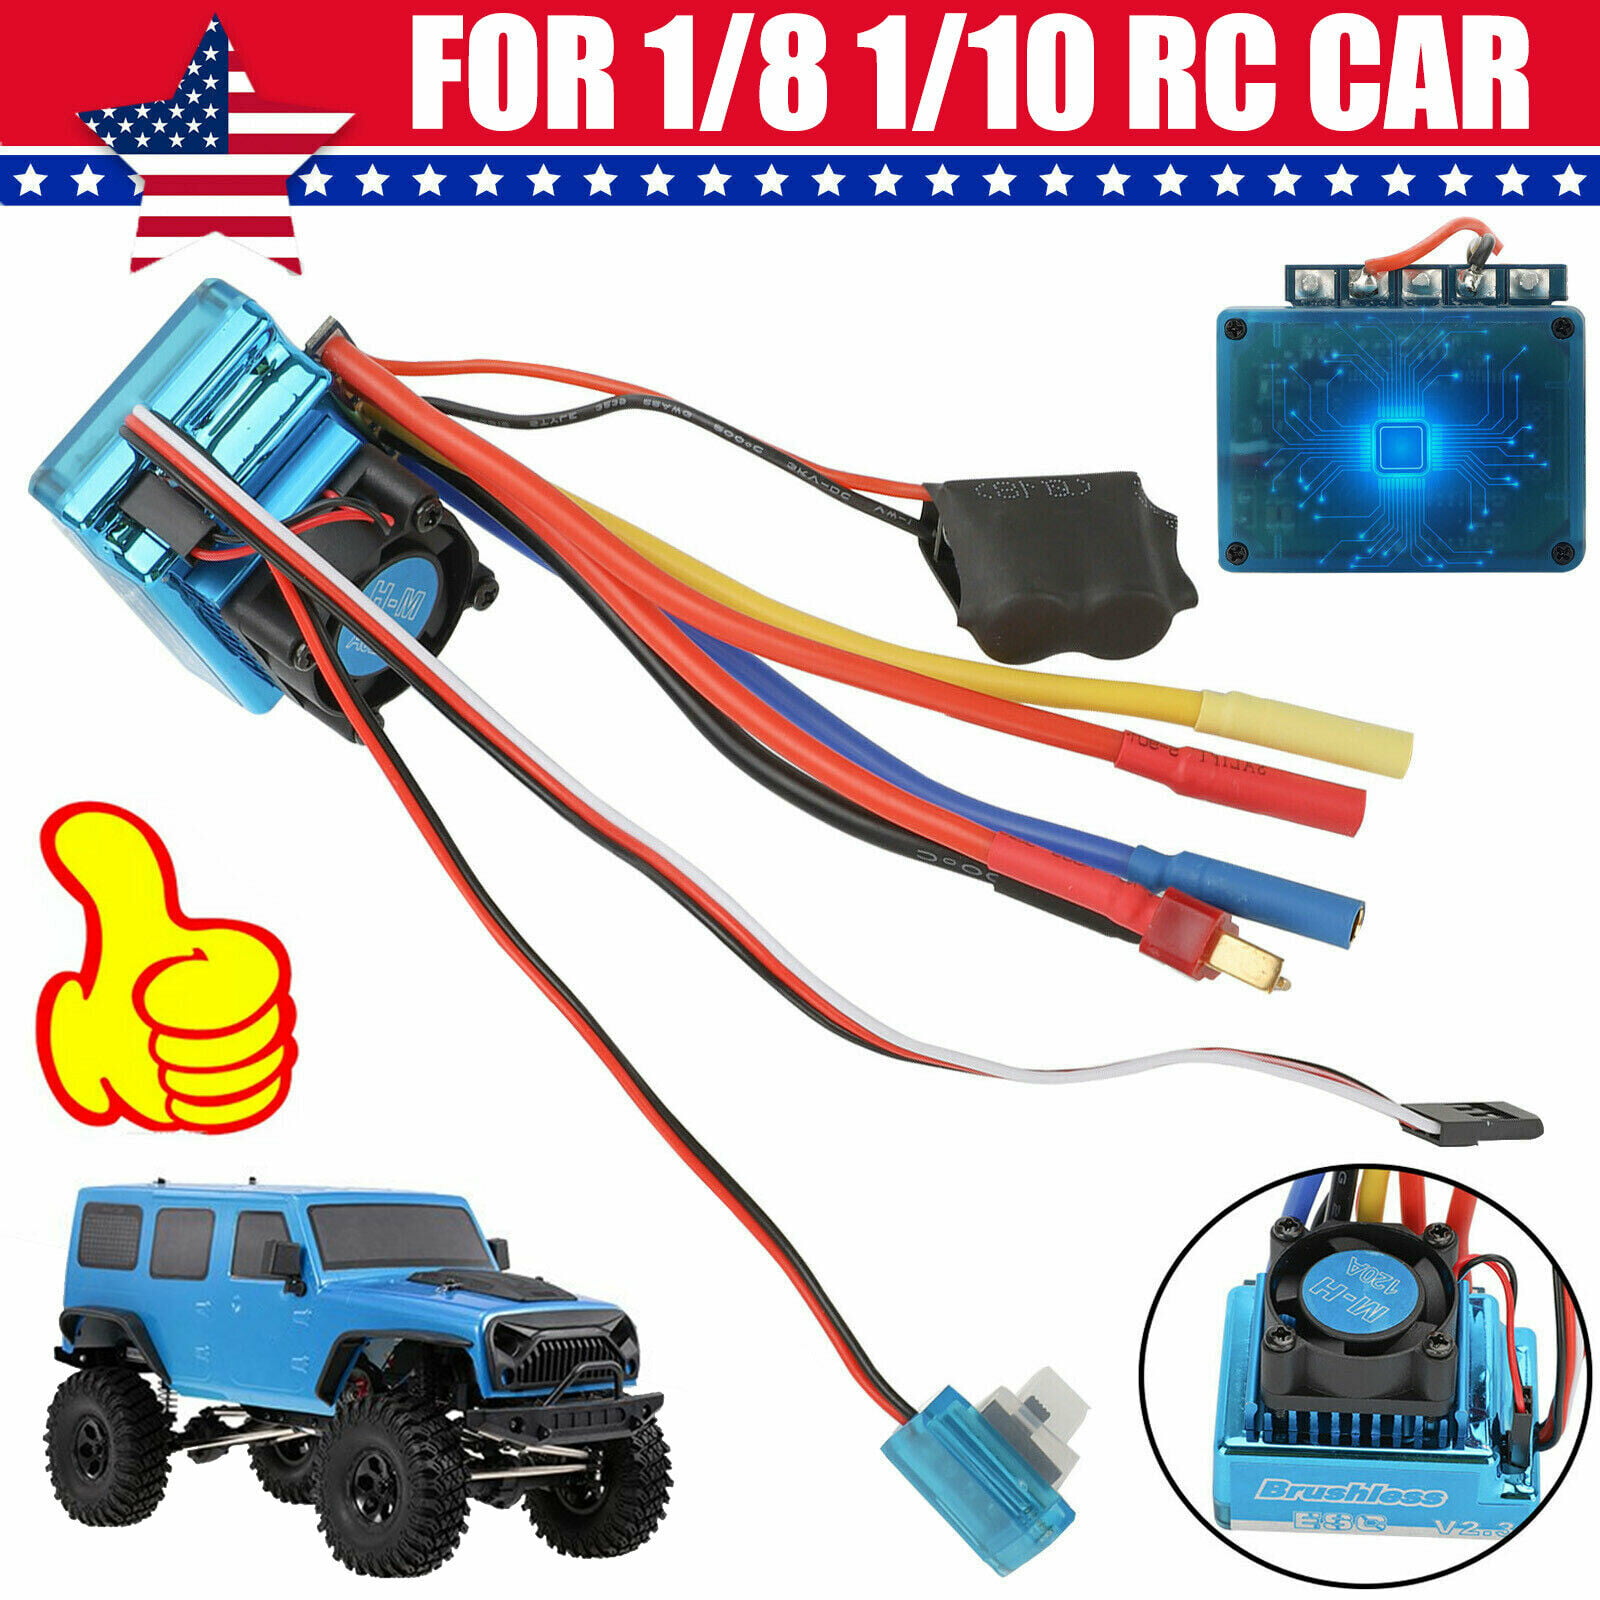 120A Brushless ESC Electric Speed Controller for 1/10 1/8RC Car Model Accessory 